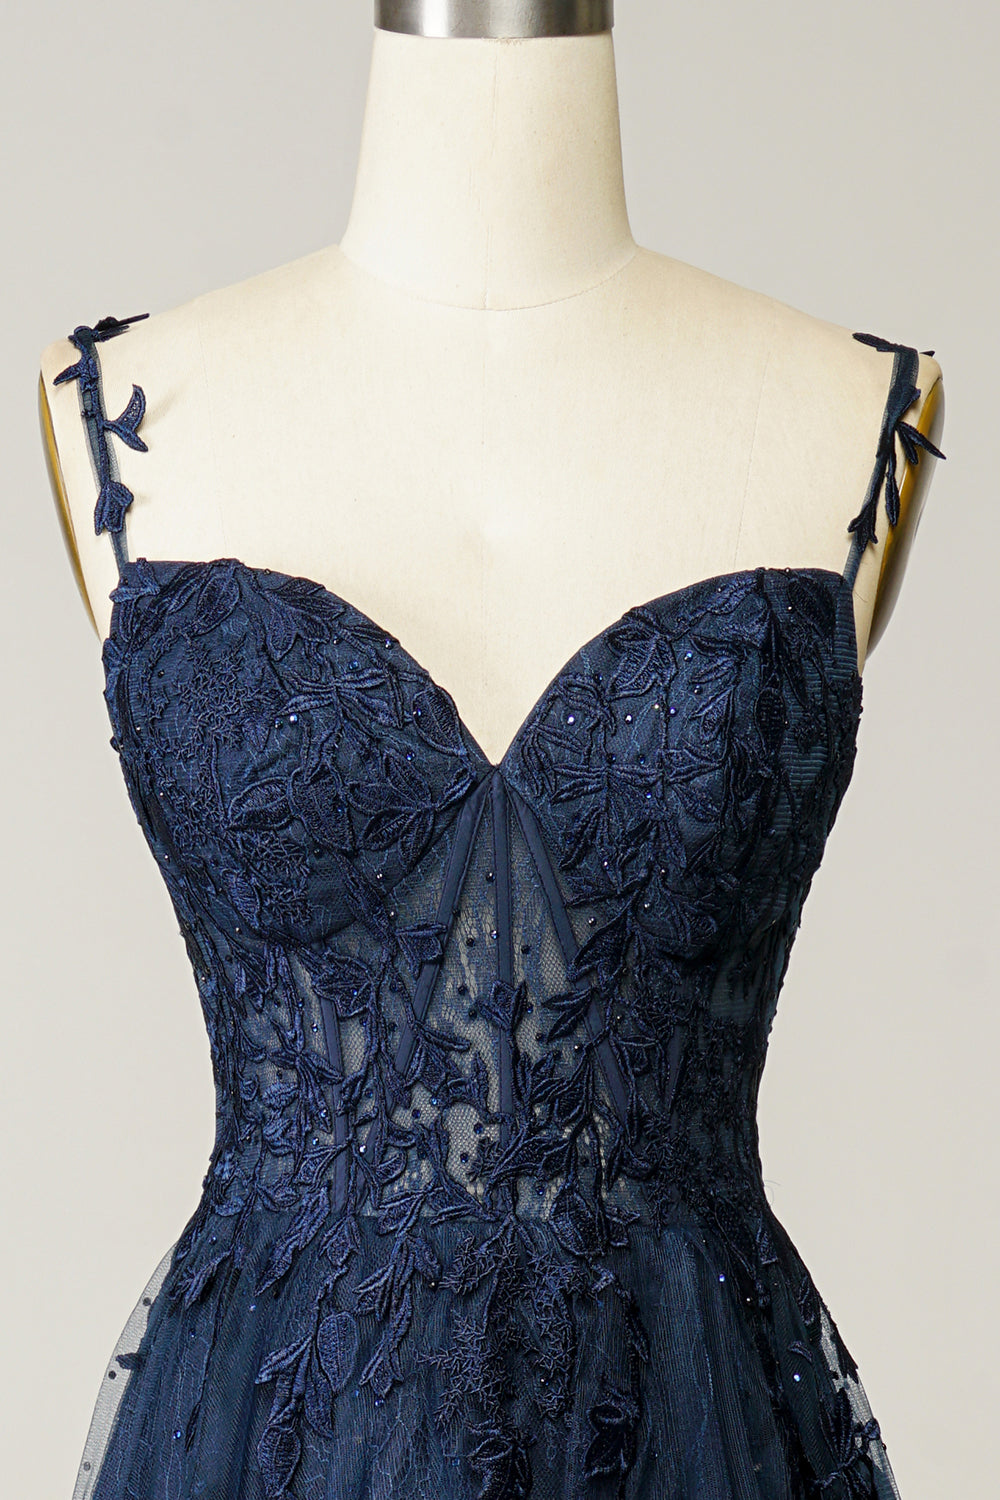 A Line Spaghetti Straps Navy Prom Dress with Appliques